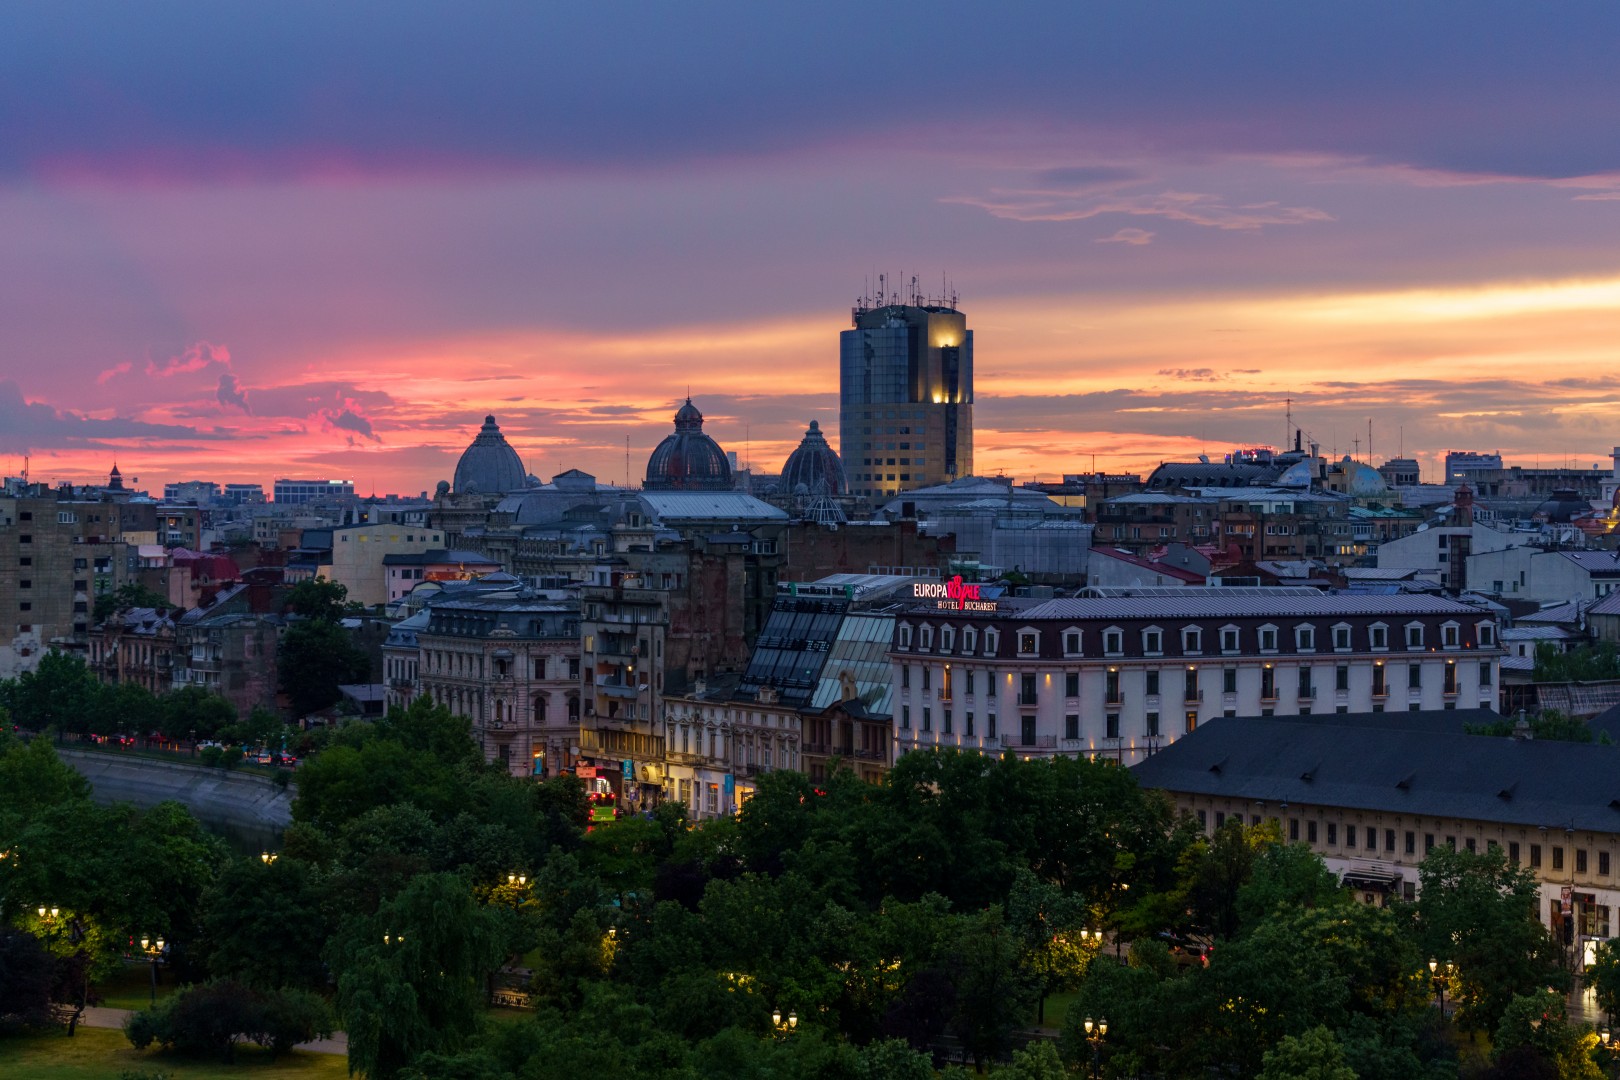 City Panorama in Bucharest on June 11, 2021 (4ced0f75c0)